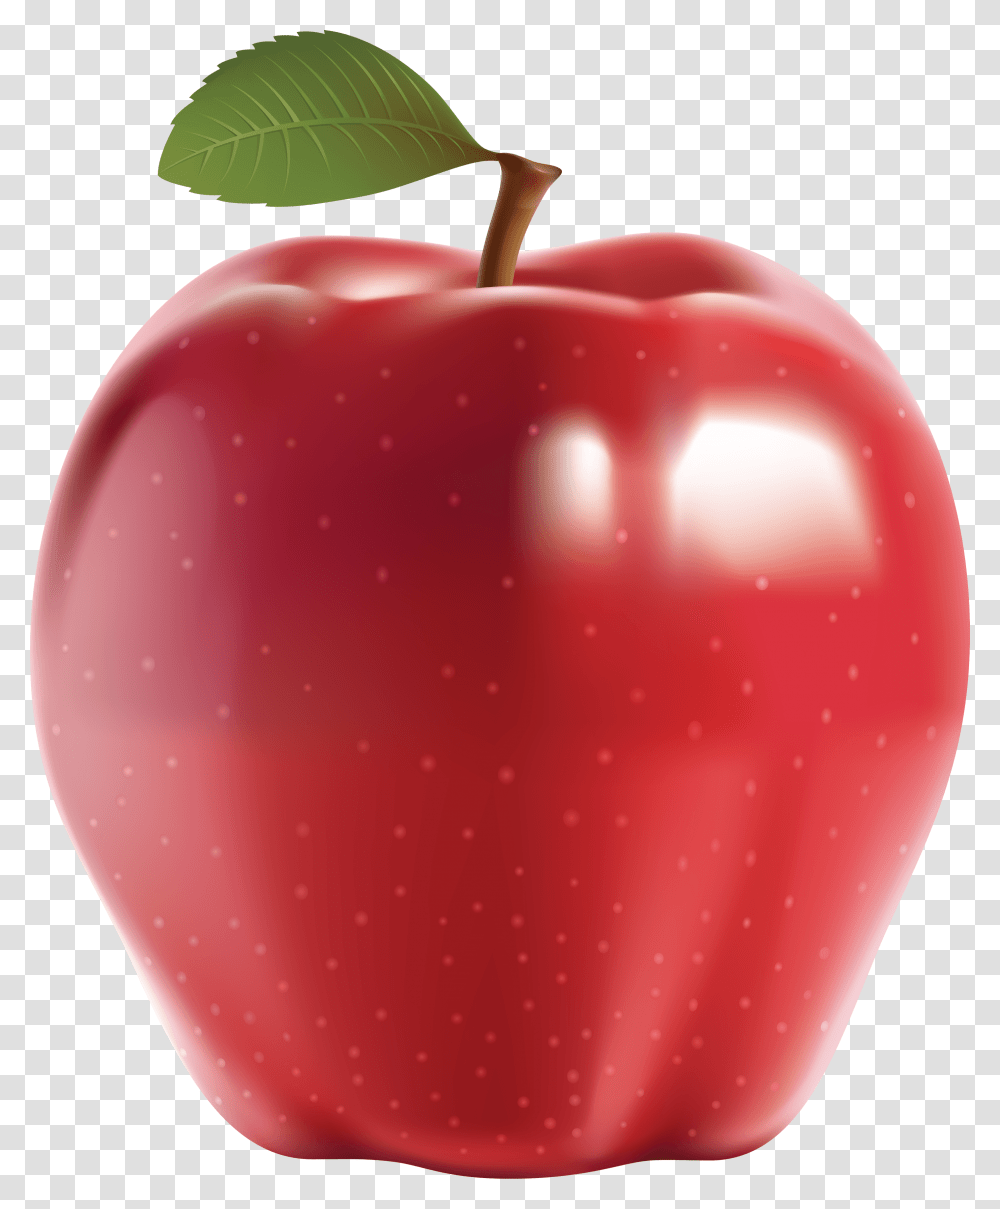 Red Apple Image Clipart Image Yabloko, Plant, Fruit, Food, Balloon Transparent Png